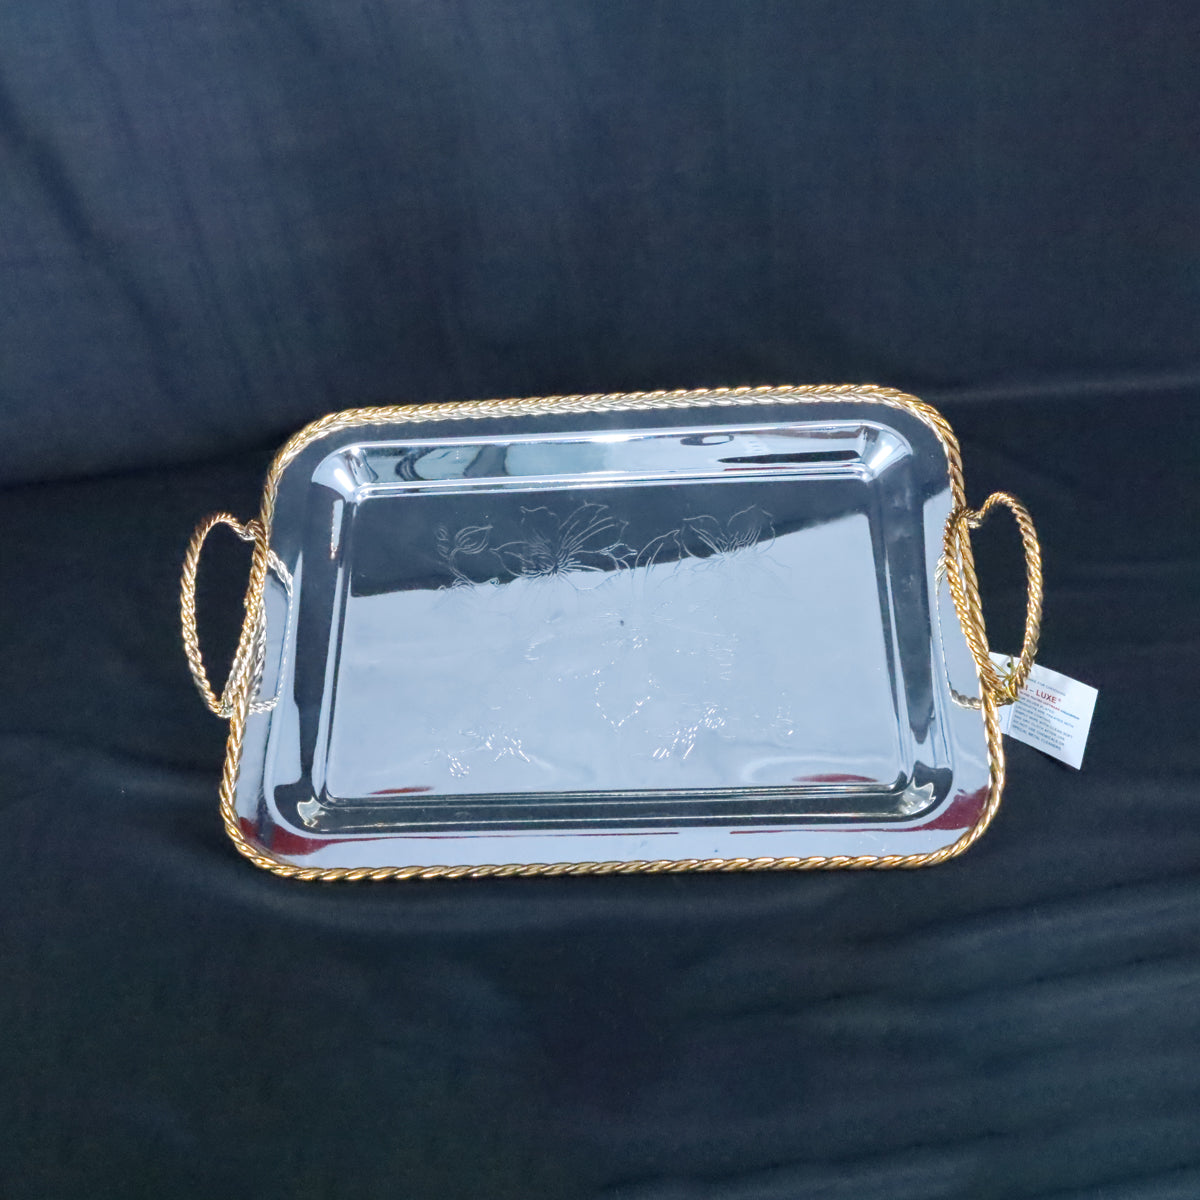 Silver Plated Rectangular Decorative Serving Gold/Silver Tray